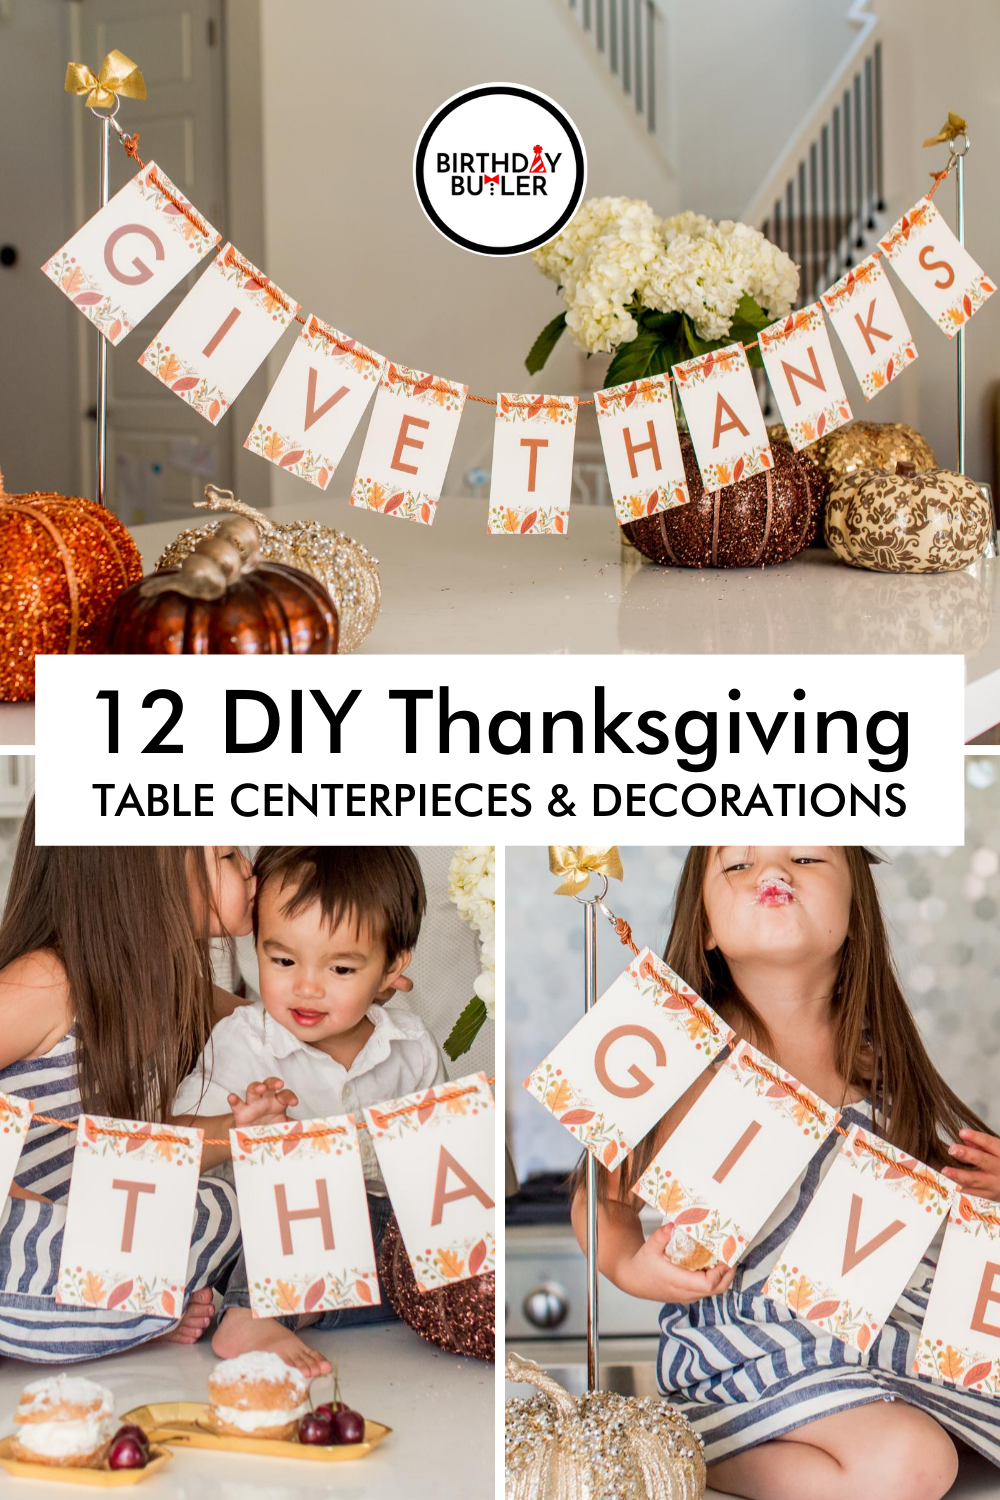 DIY Thanksgiving Table Centerpieces & Decorations for Adults